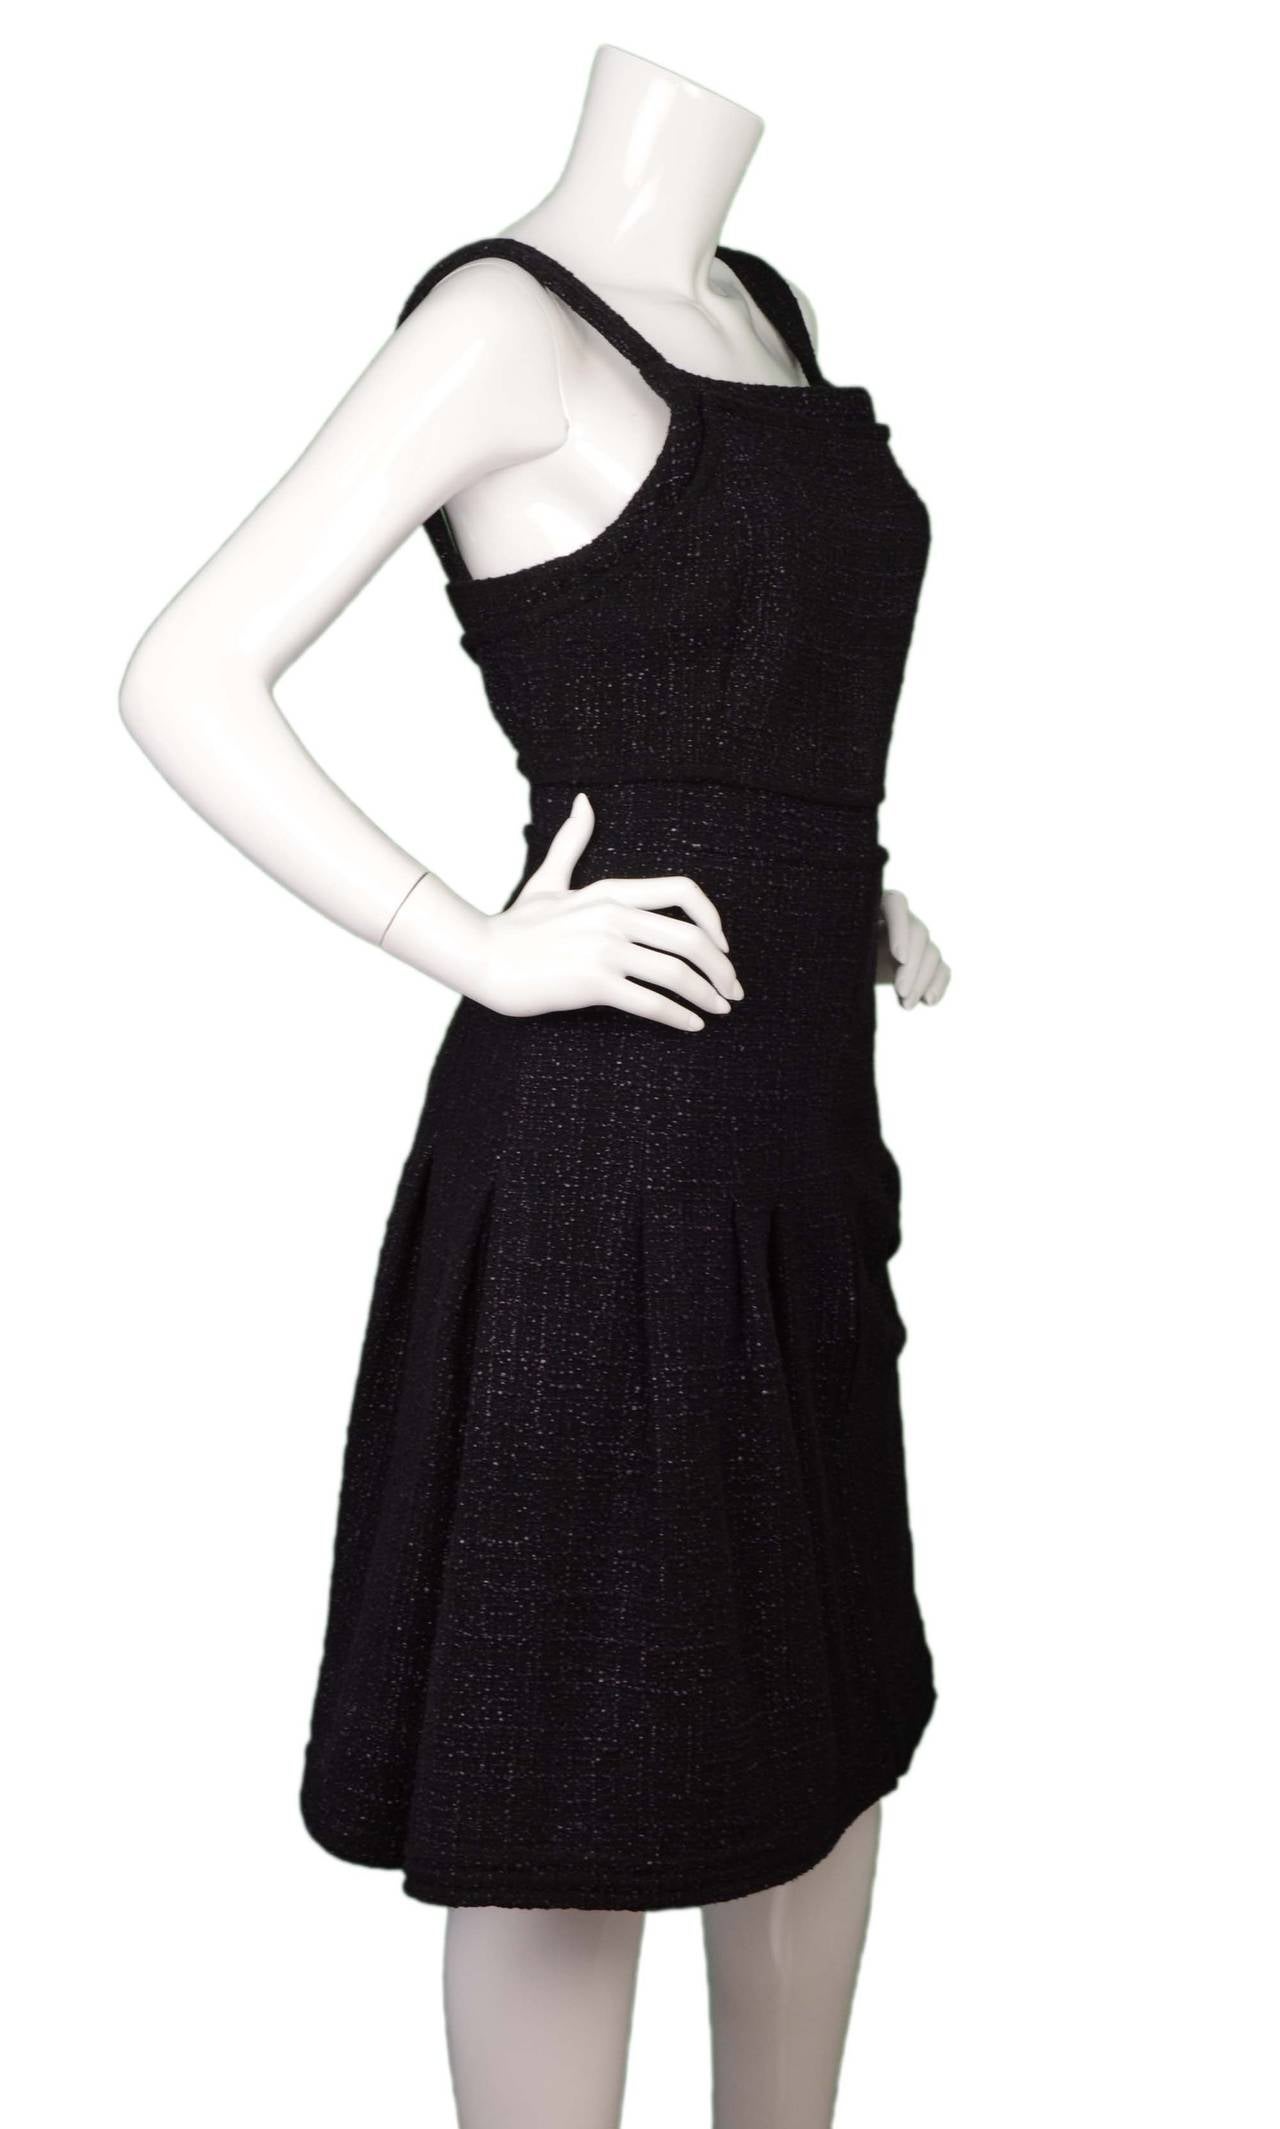 Chanel Black & Purple Tweed Pleated Dress 
Features purple stone pendant at hip
Made in: France
Year of Production: 2012
Color: Black and purple
Composition: 90% cotton, 10% rayon
Lining: Purple, 100% silk
Closure/opening: Back center zip